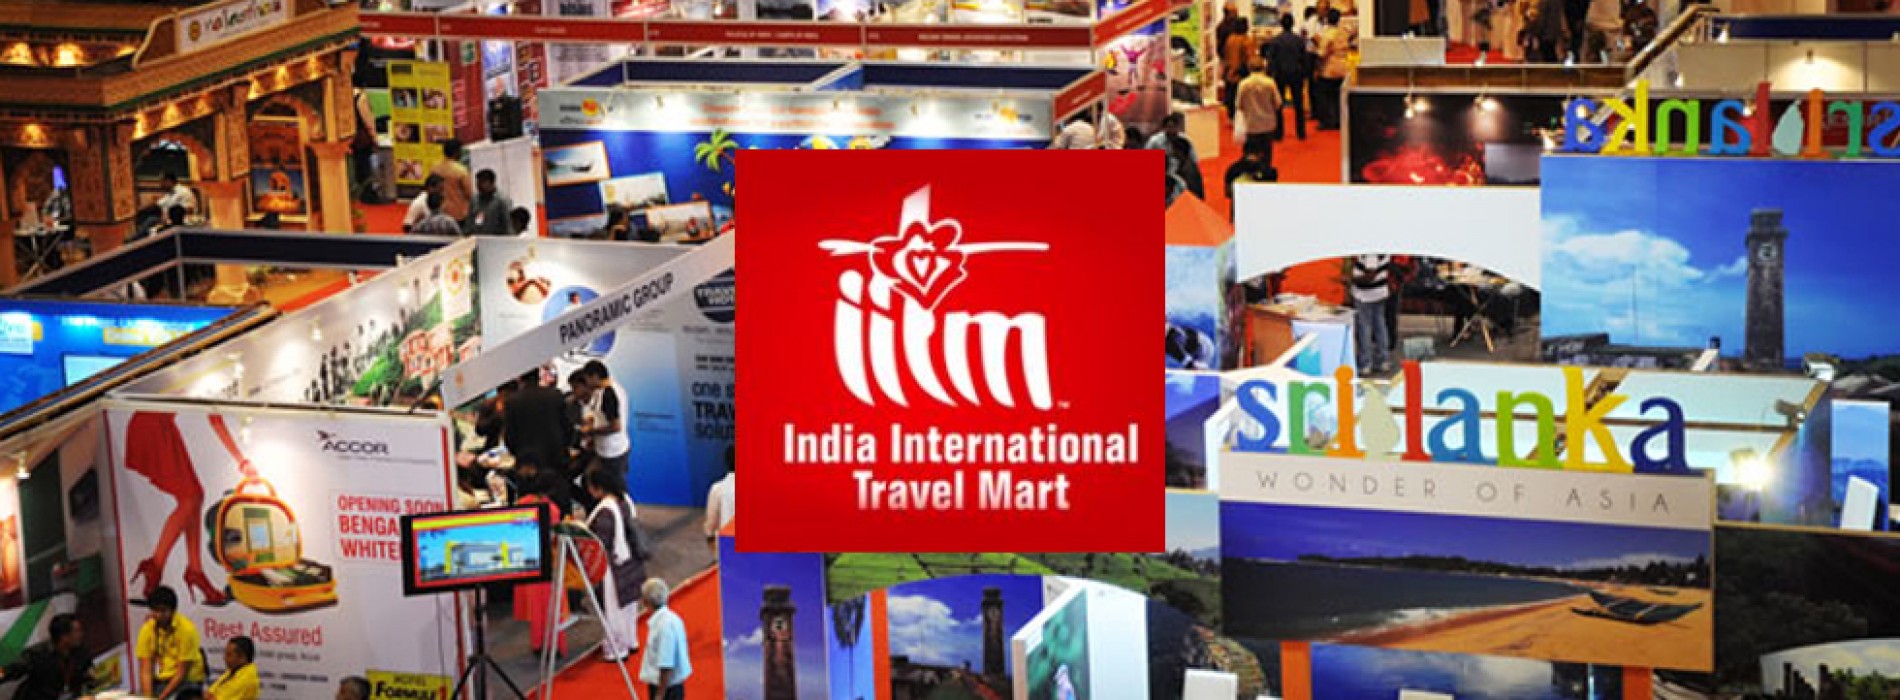 India International Travel Mart events will be conducted in eight major markets of India during 2017-18